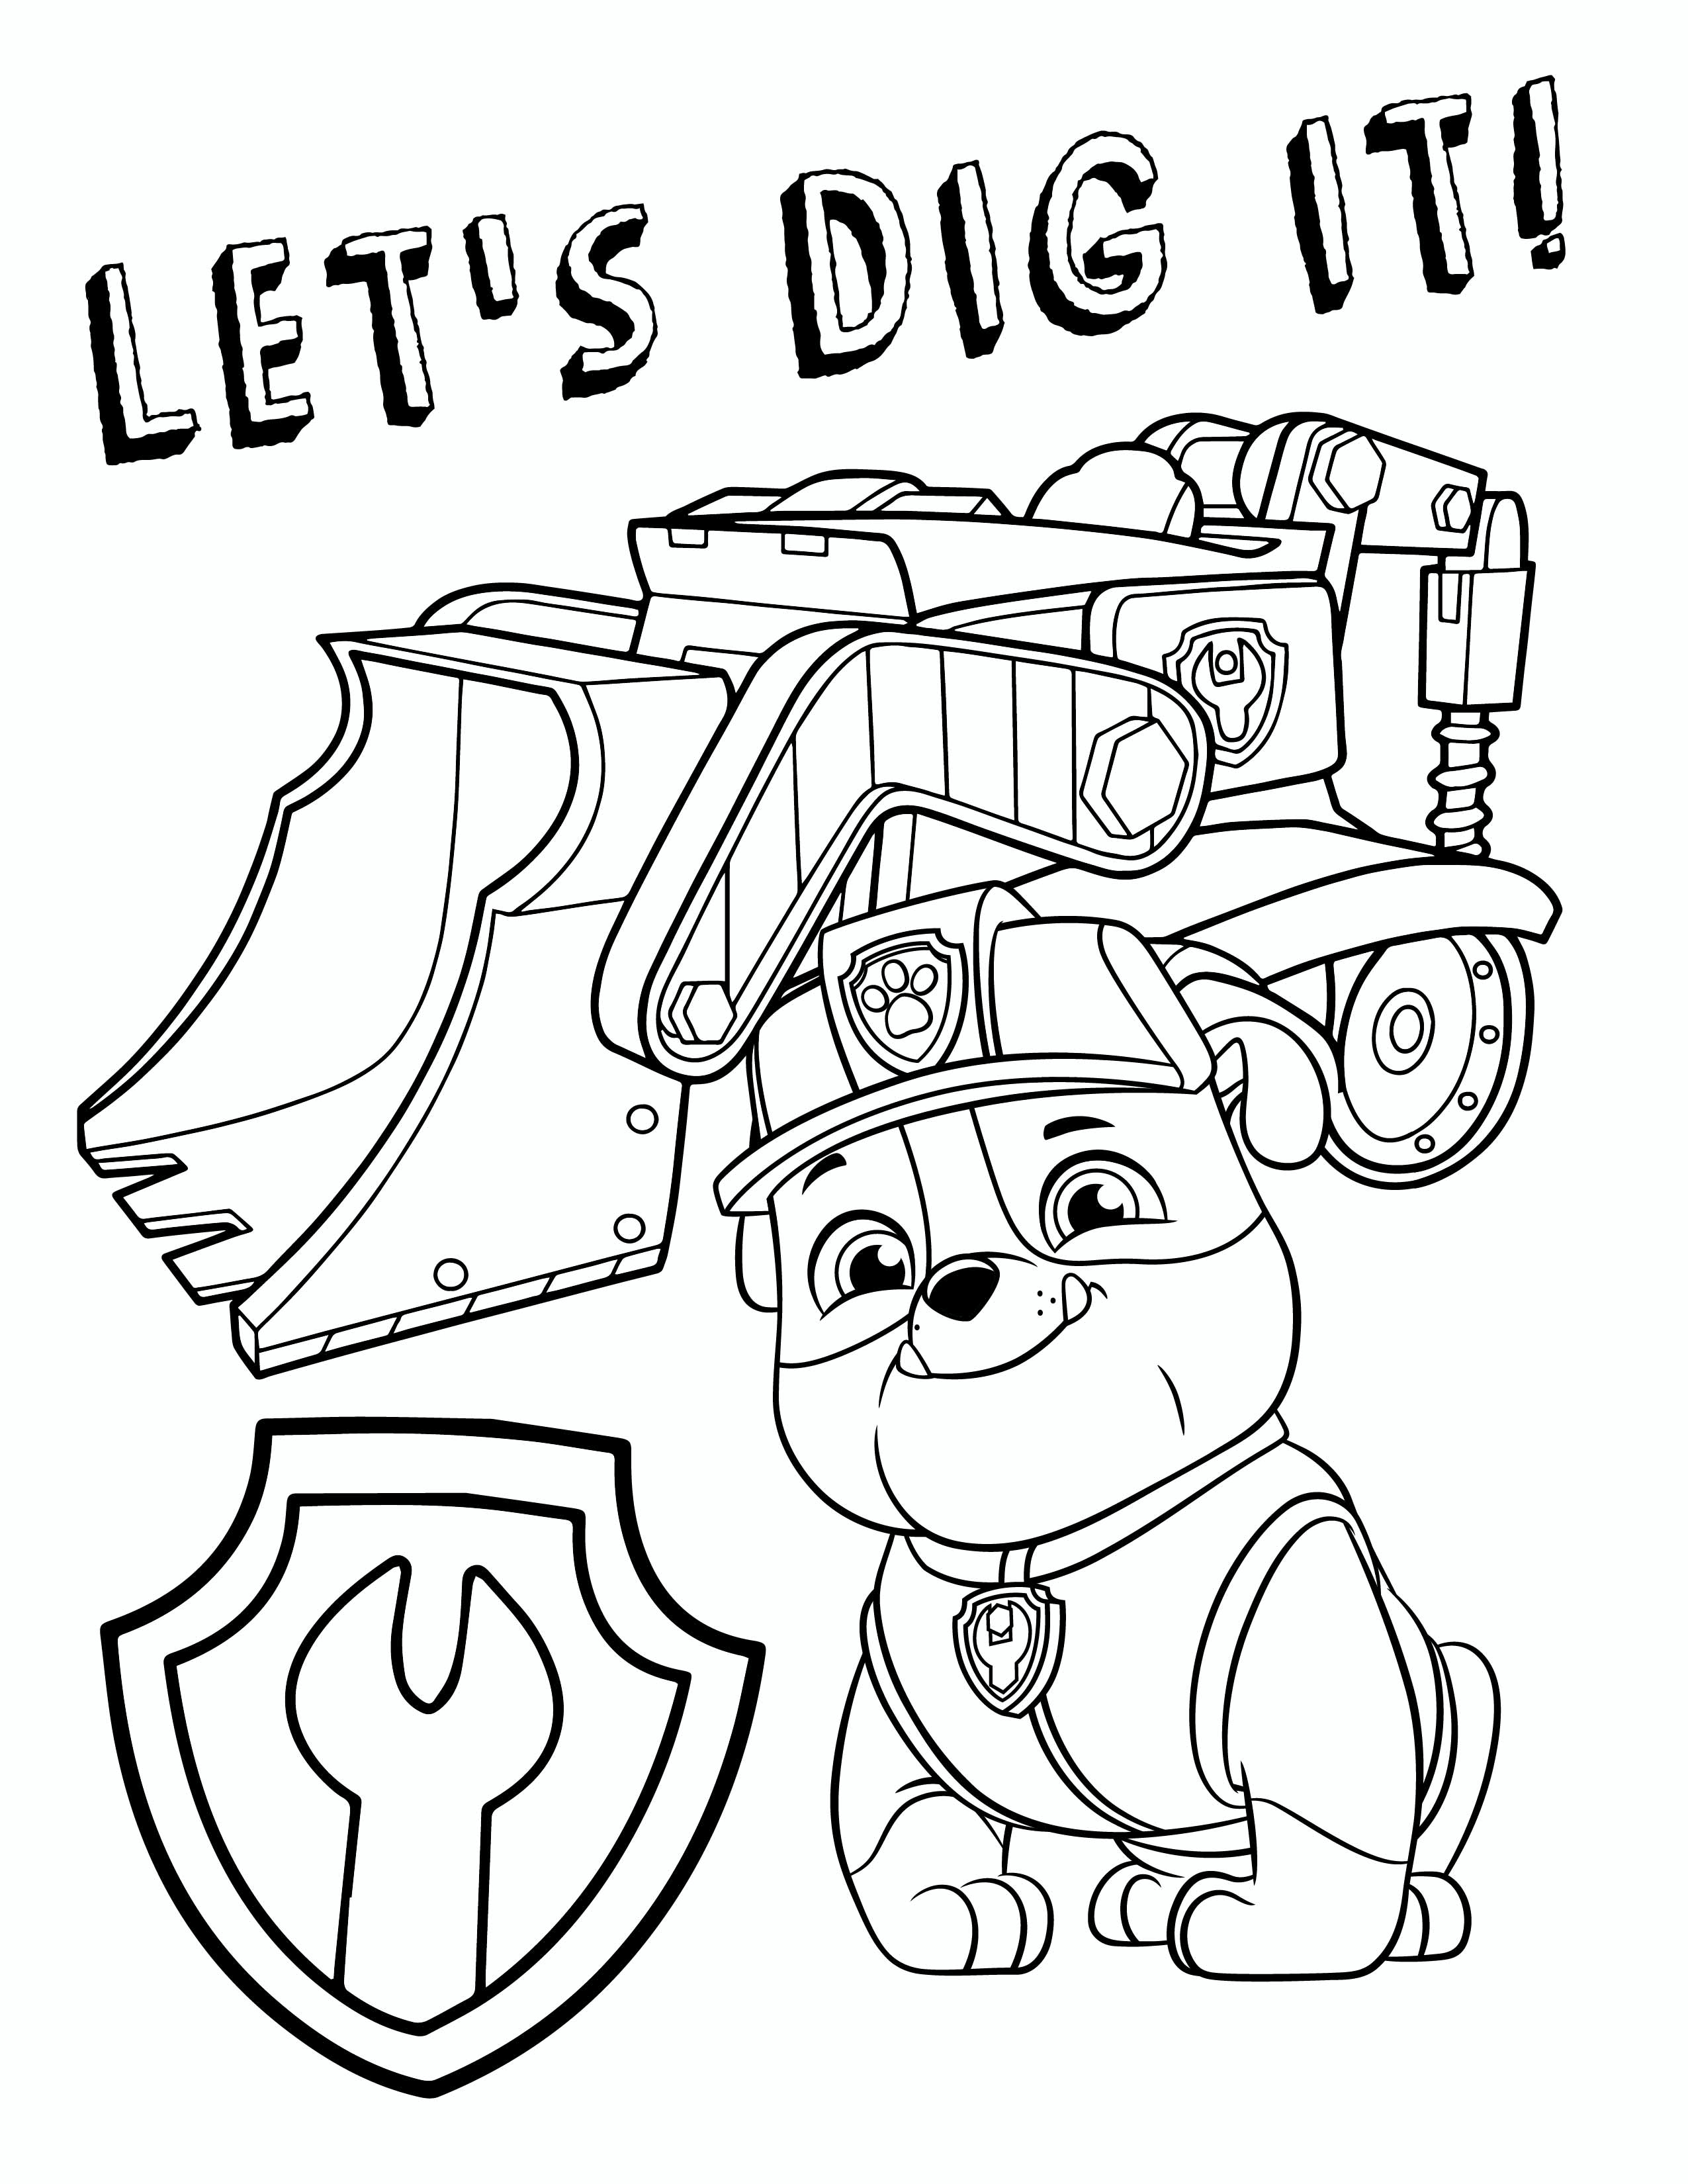 Coloring Pages : Coloring Pages Paw Patrol Free Sheets Printable Of - Free Printable Paw Patrol Coloring Pages